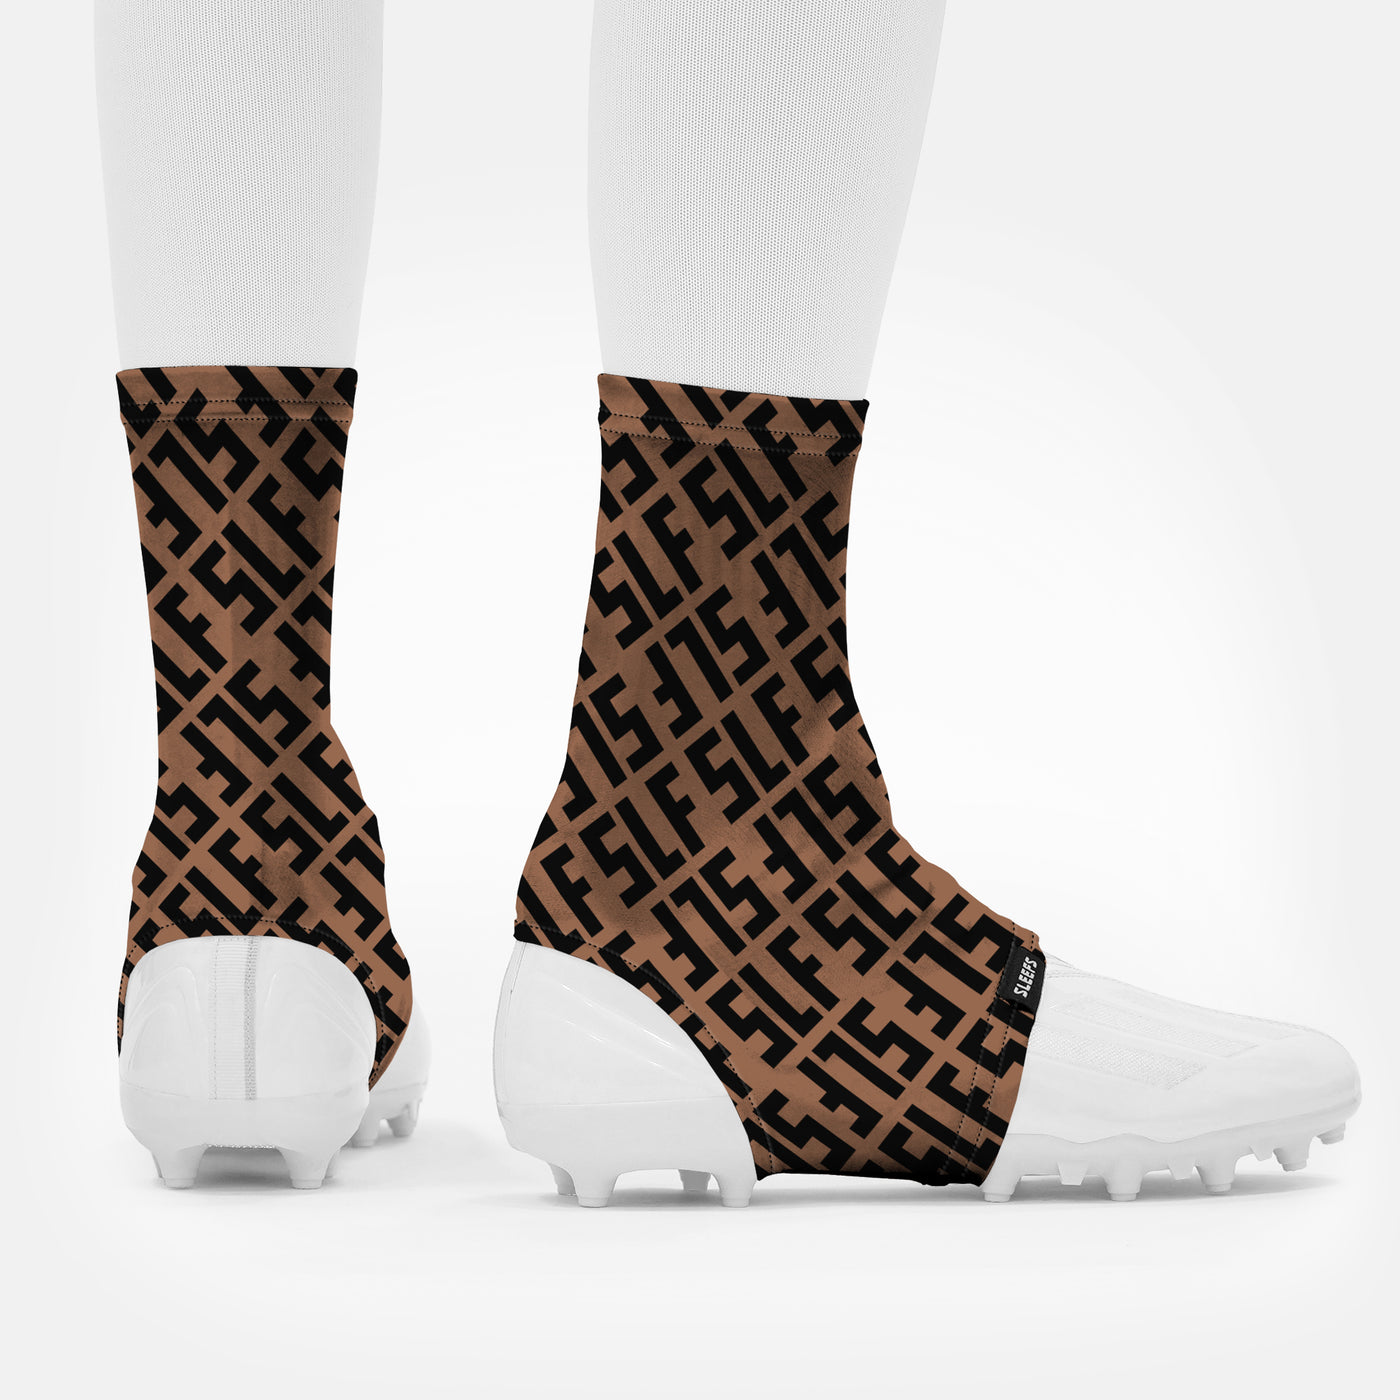 SLF Pattern Spats / Cleat Covers